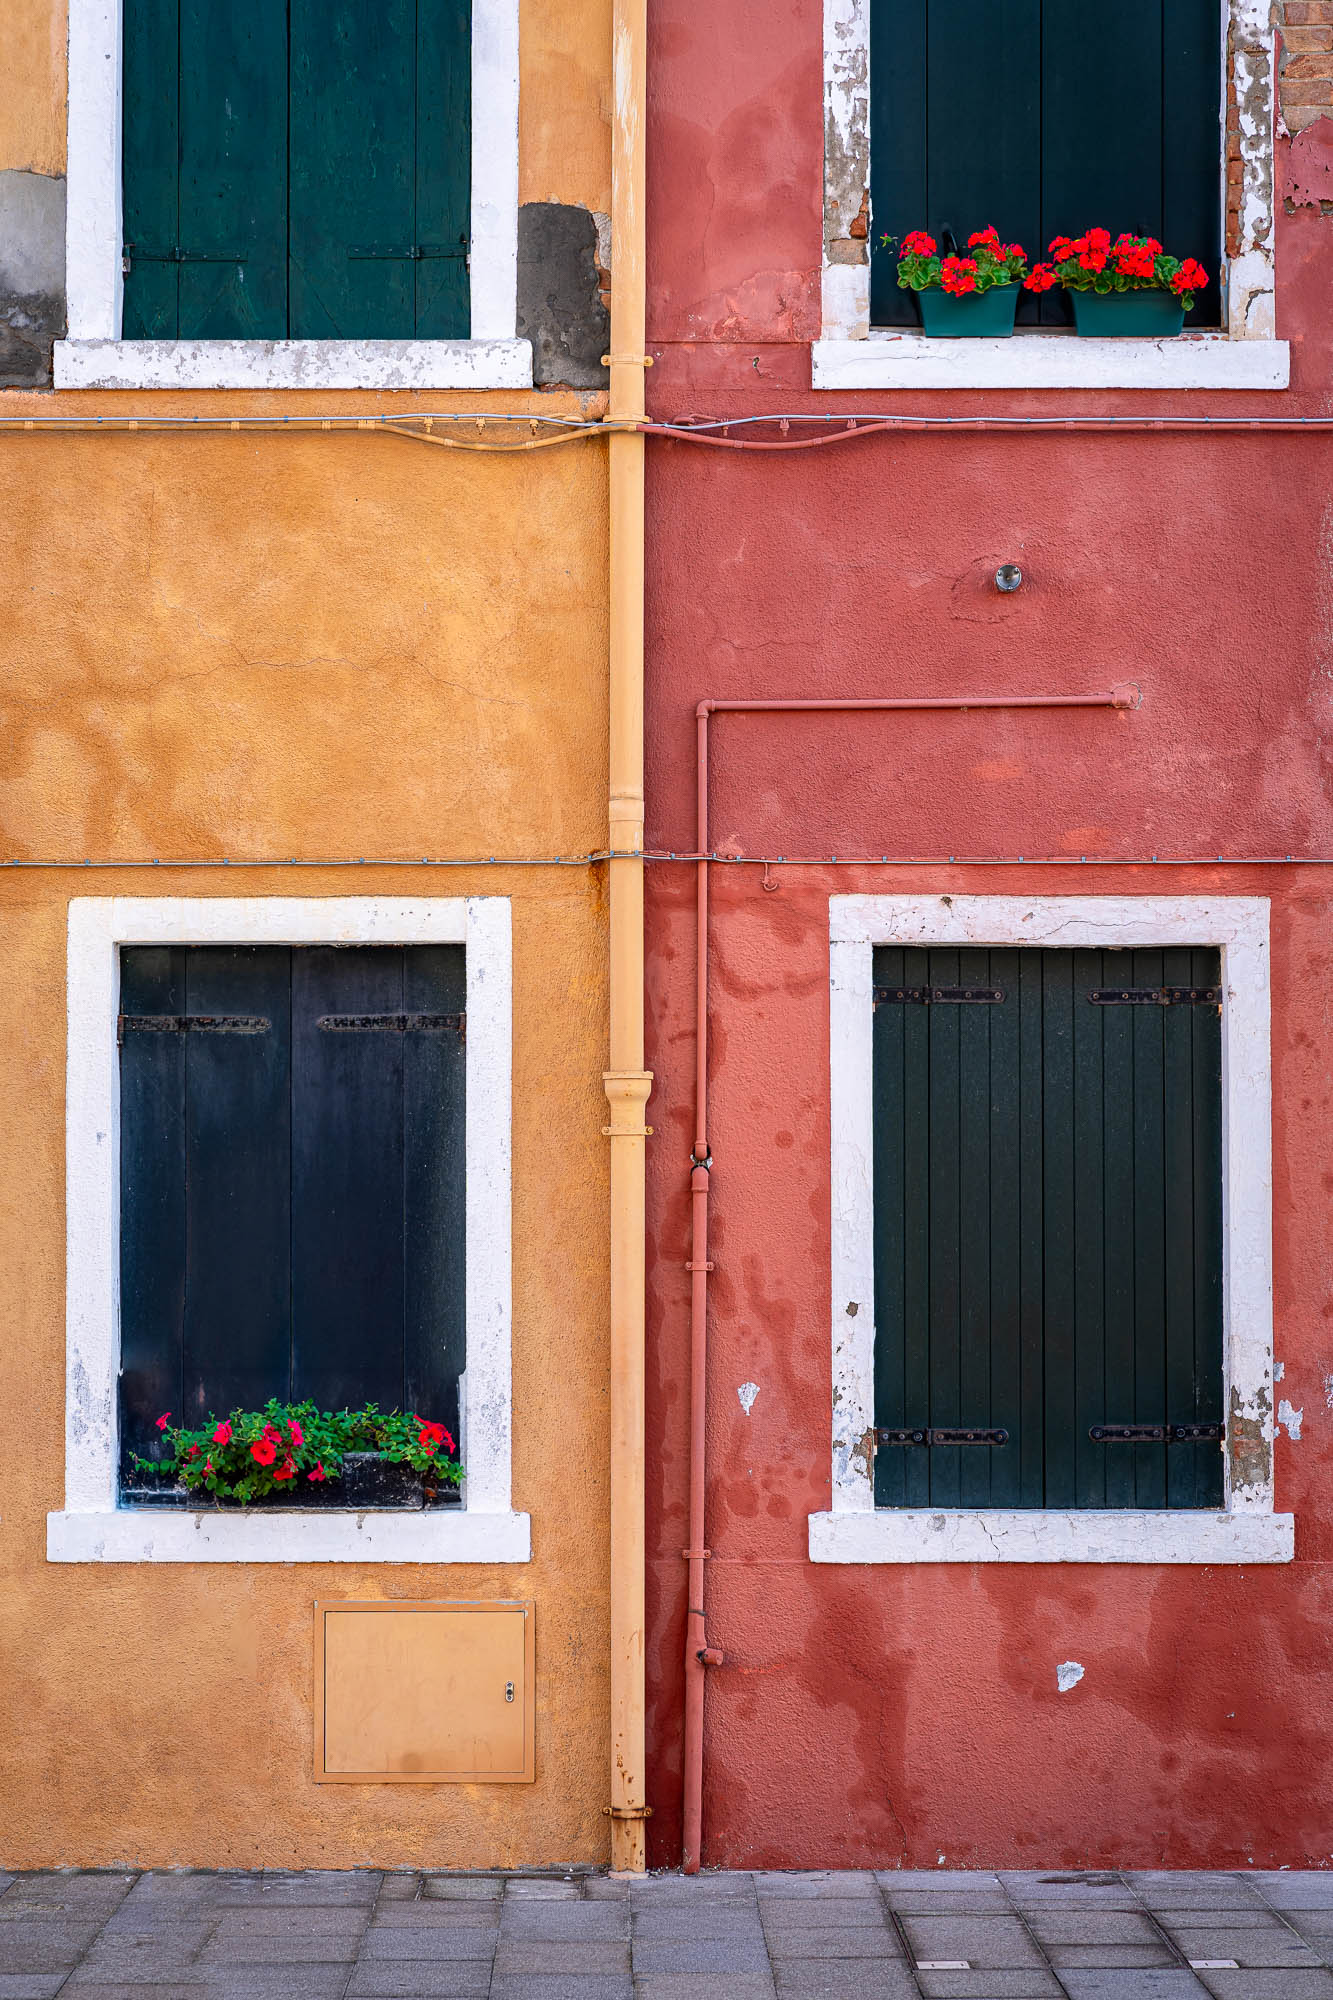 Two houses in Burano Venice